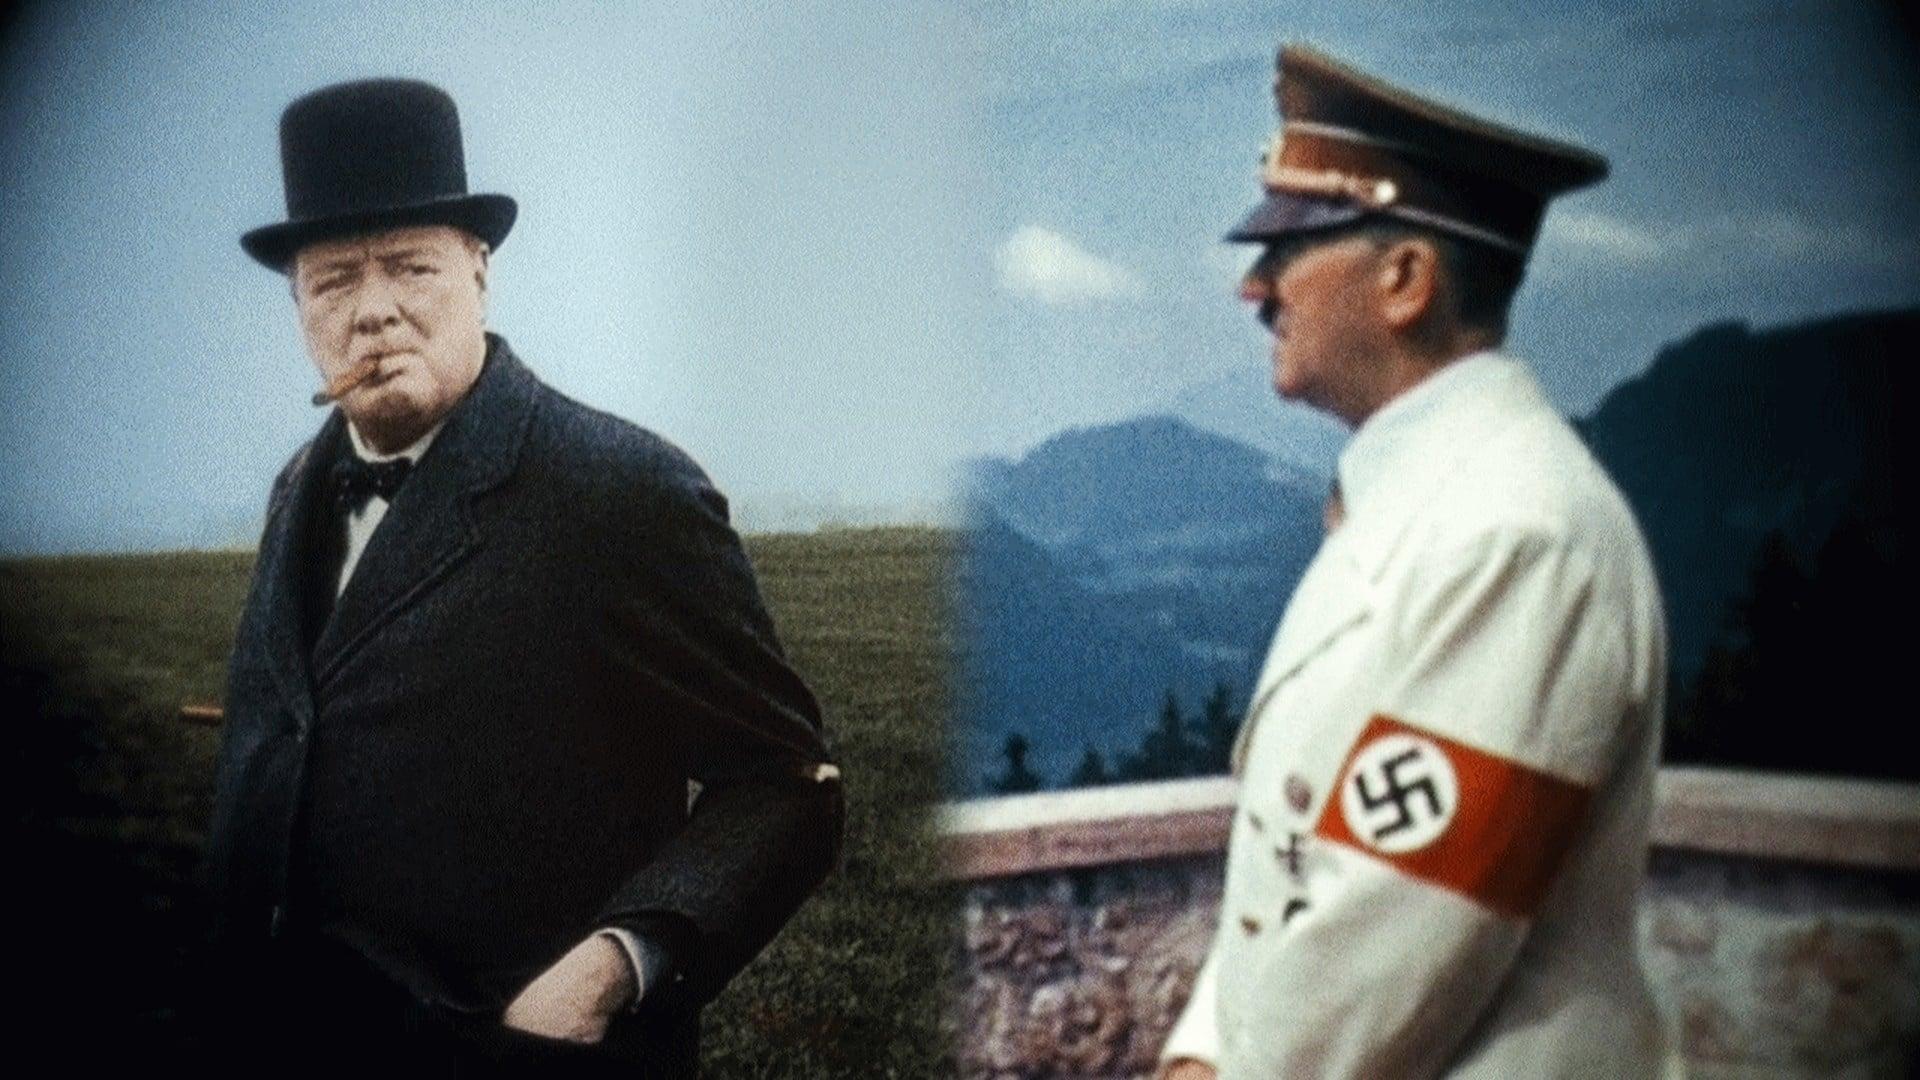 The Eagle and the Lion: Hitler vs Churchill backdrop